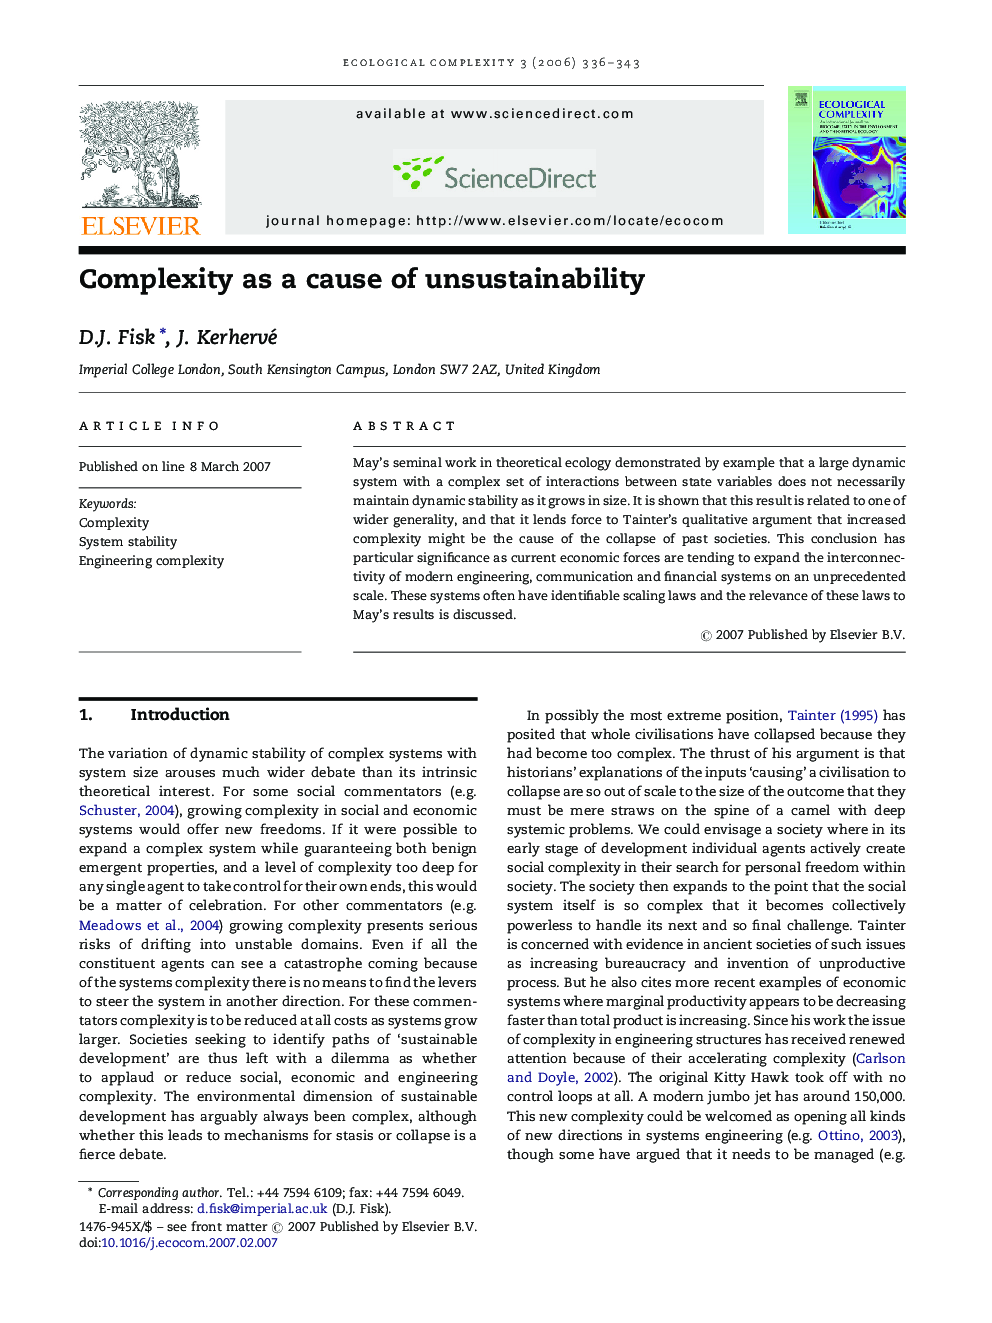 Complexity as a cause of unsustainability